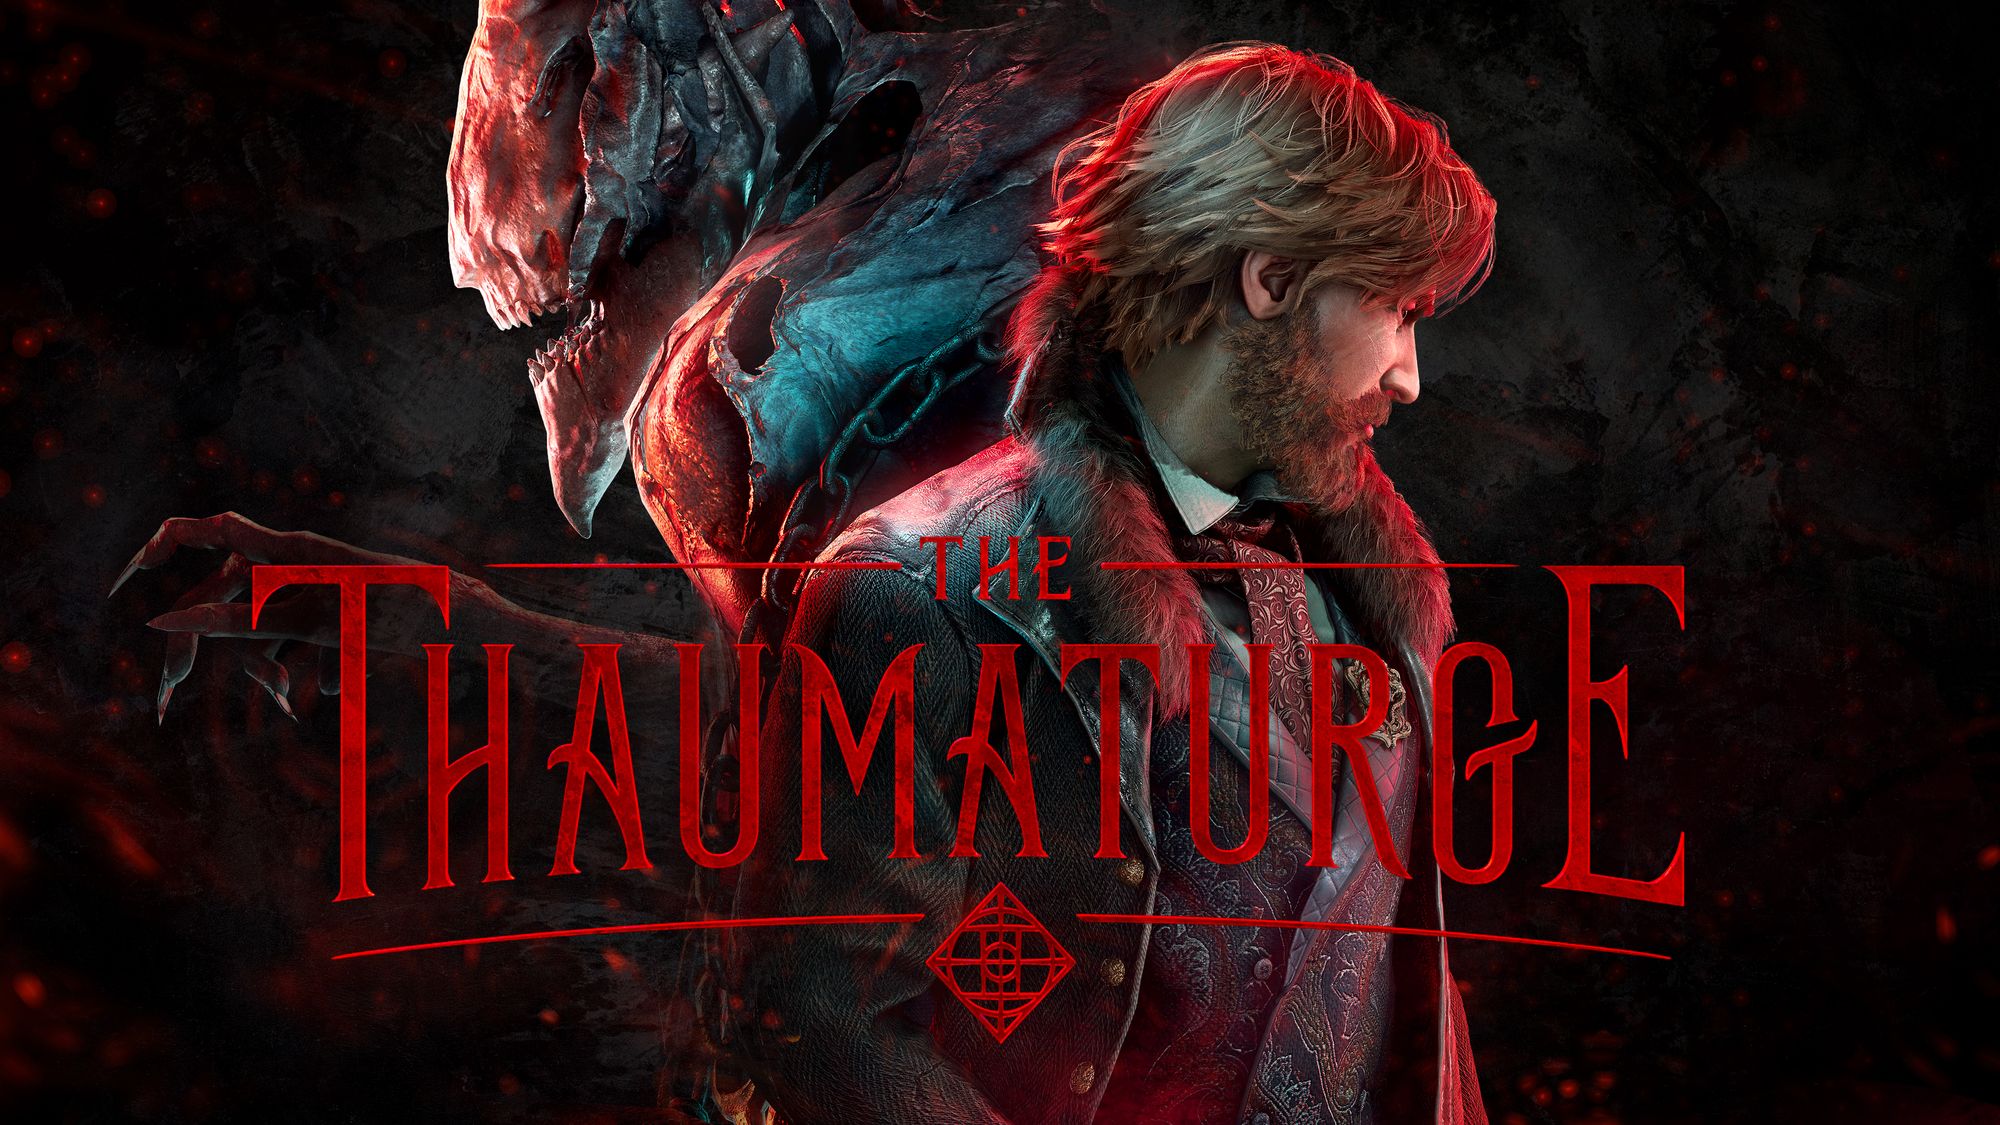 The Thaumaturge by 11 bit studios to Launch on PC on December 5th - Play the Prologue Demo Now on Steam